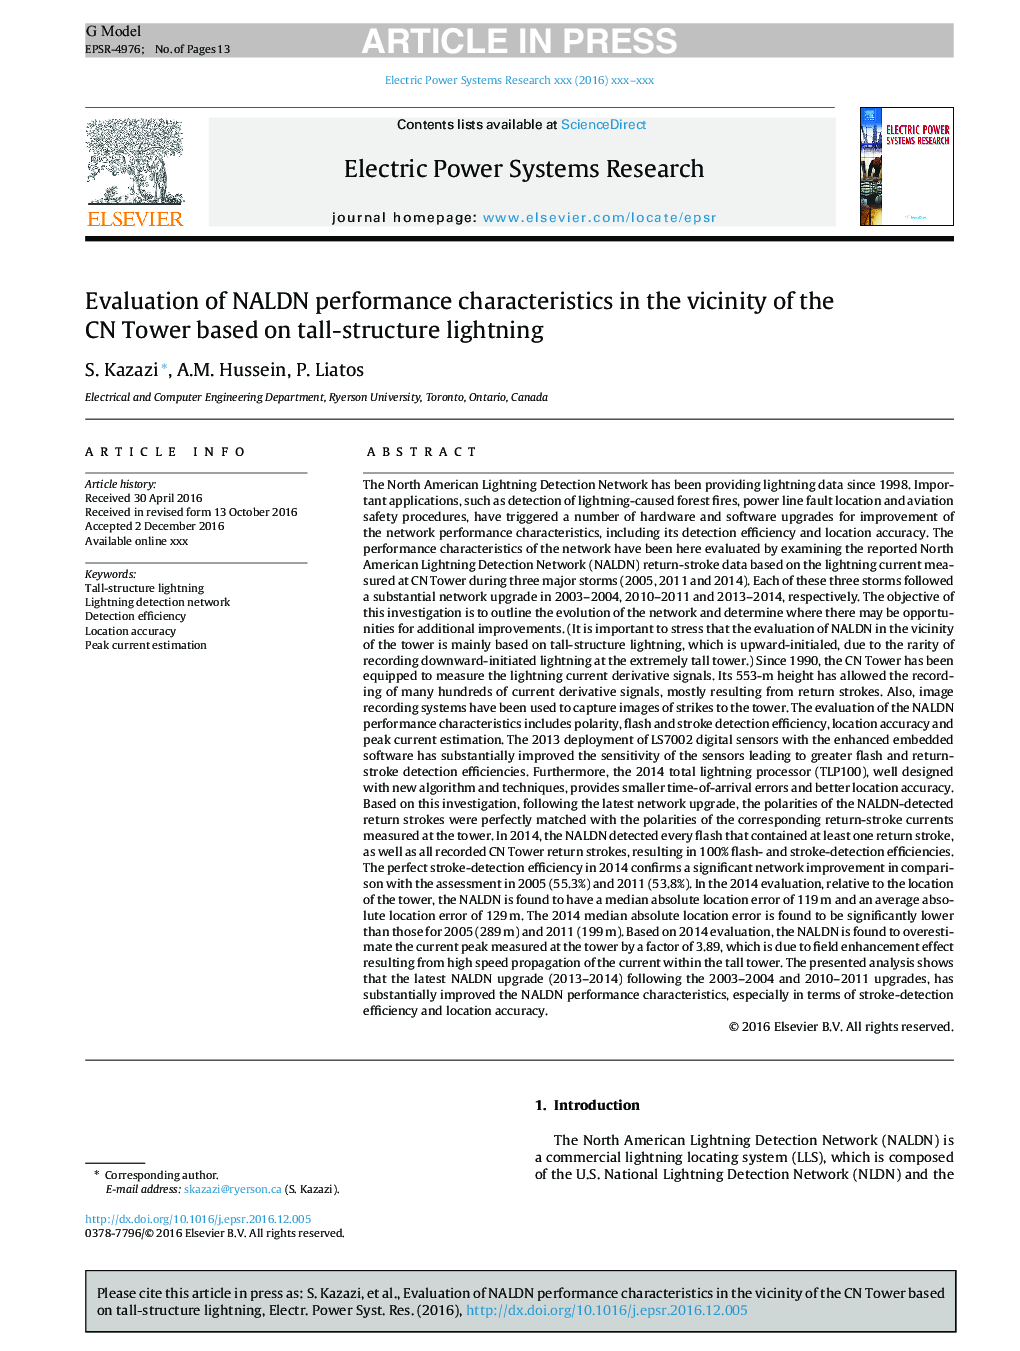 Evaluation of NALDN performance characteristics in the vicinity of the CN Tower based on tall-structure lightning